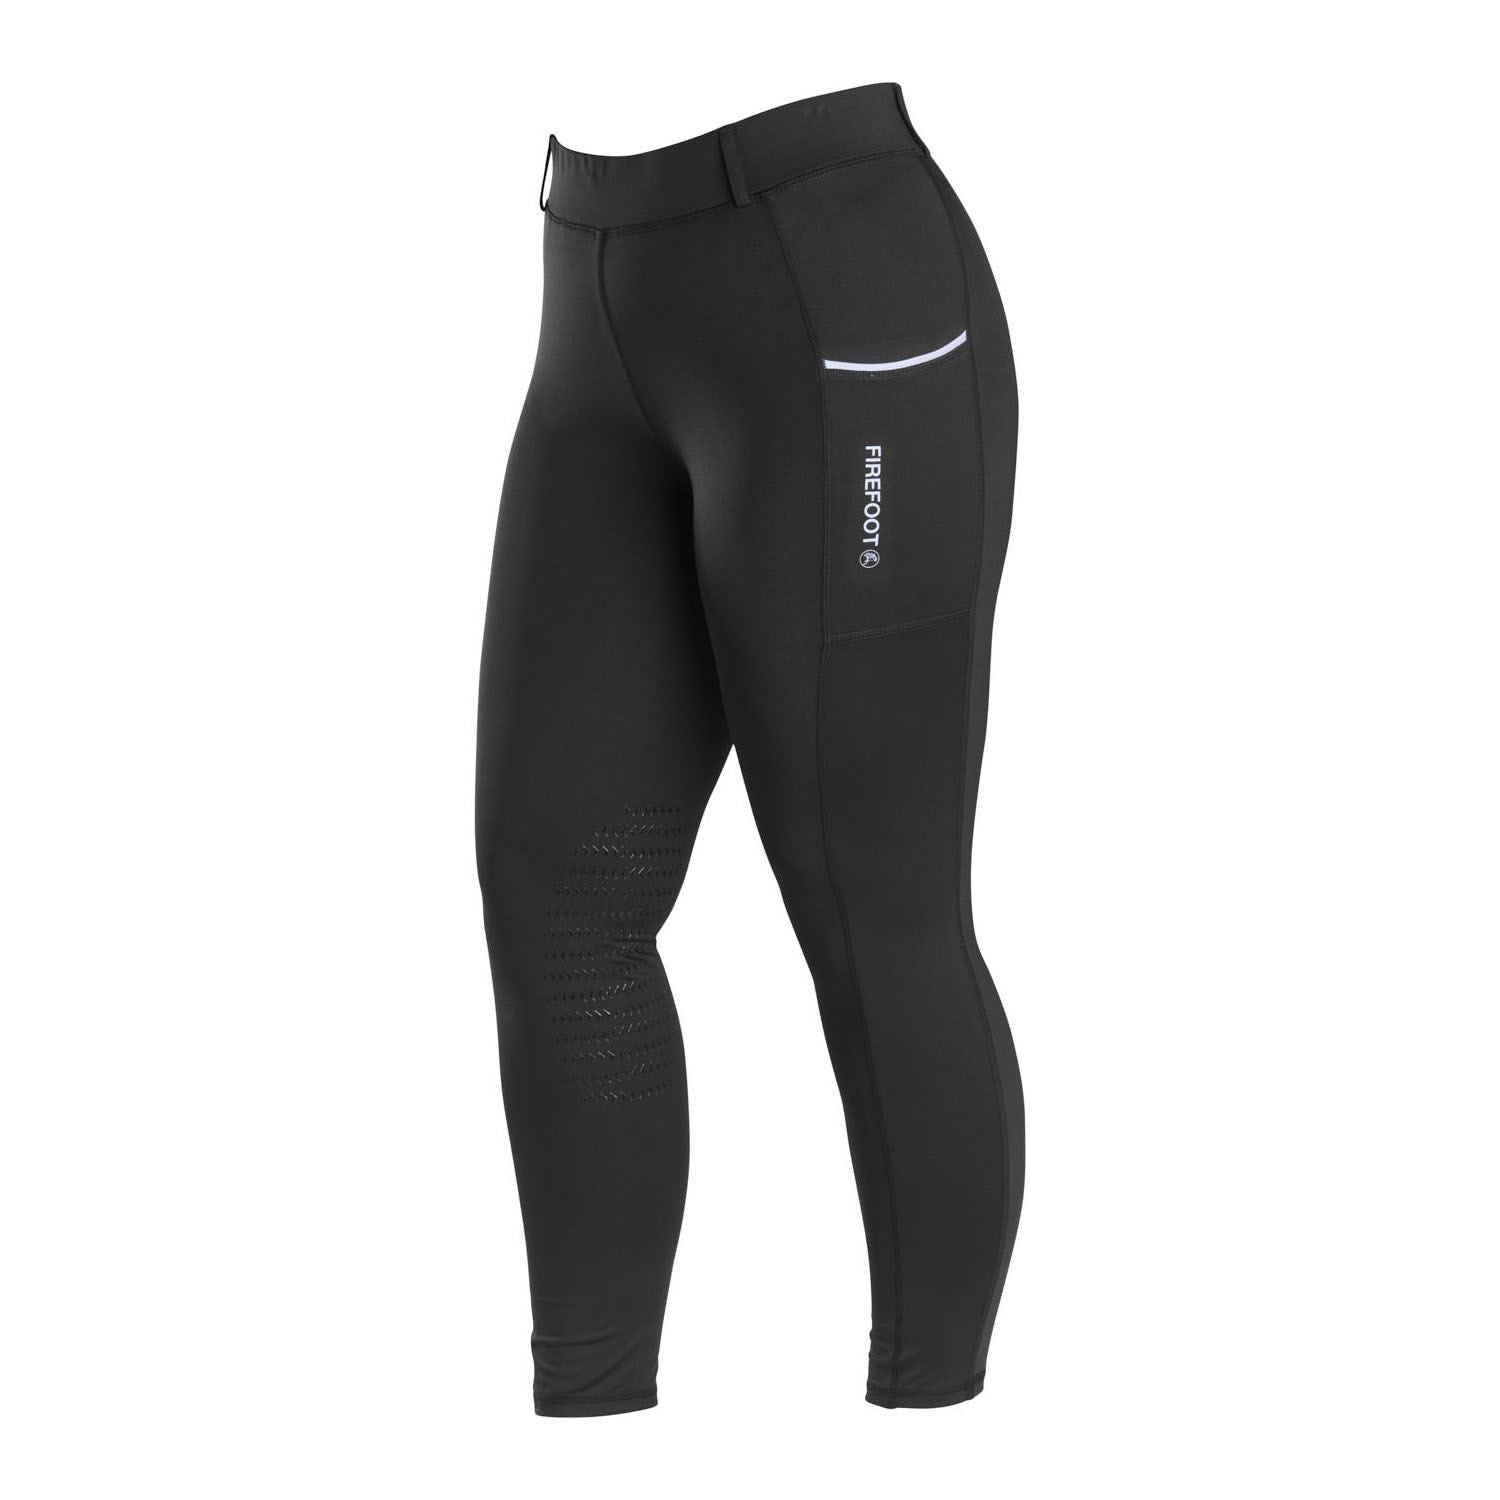 Firefoot Howden Riding Tights Ladies - Just Horse Riders